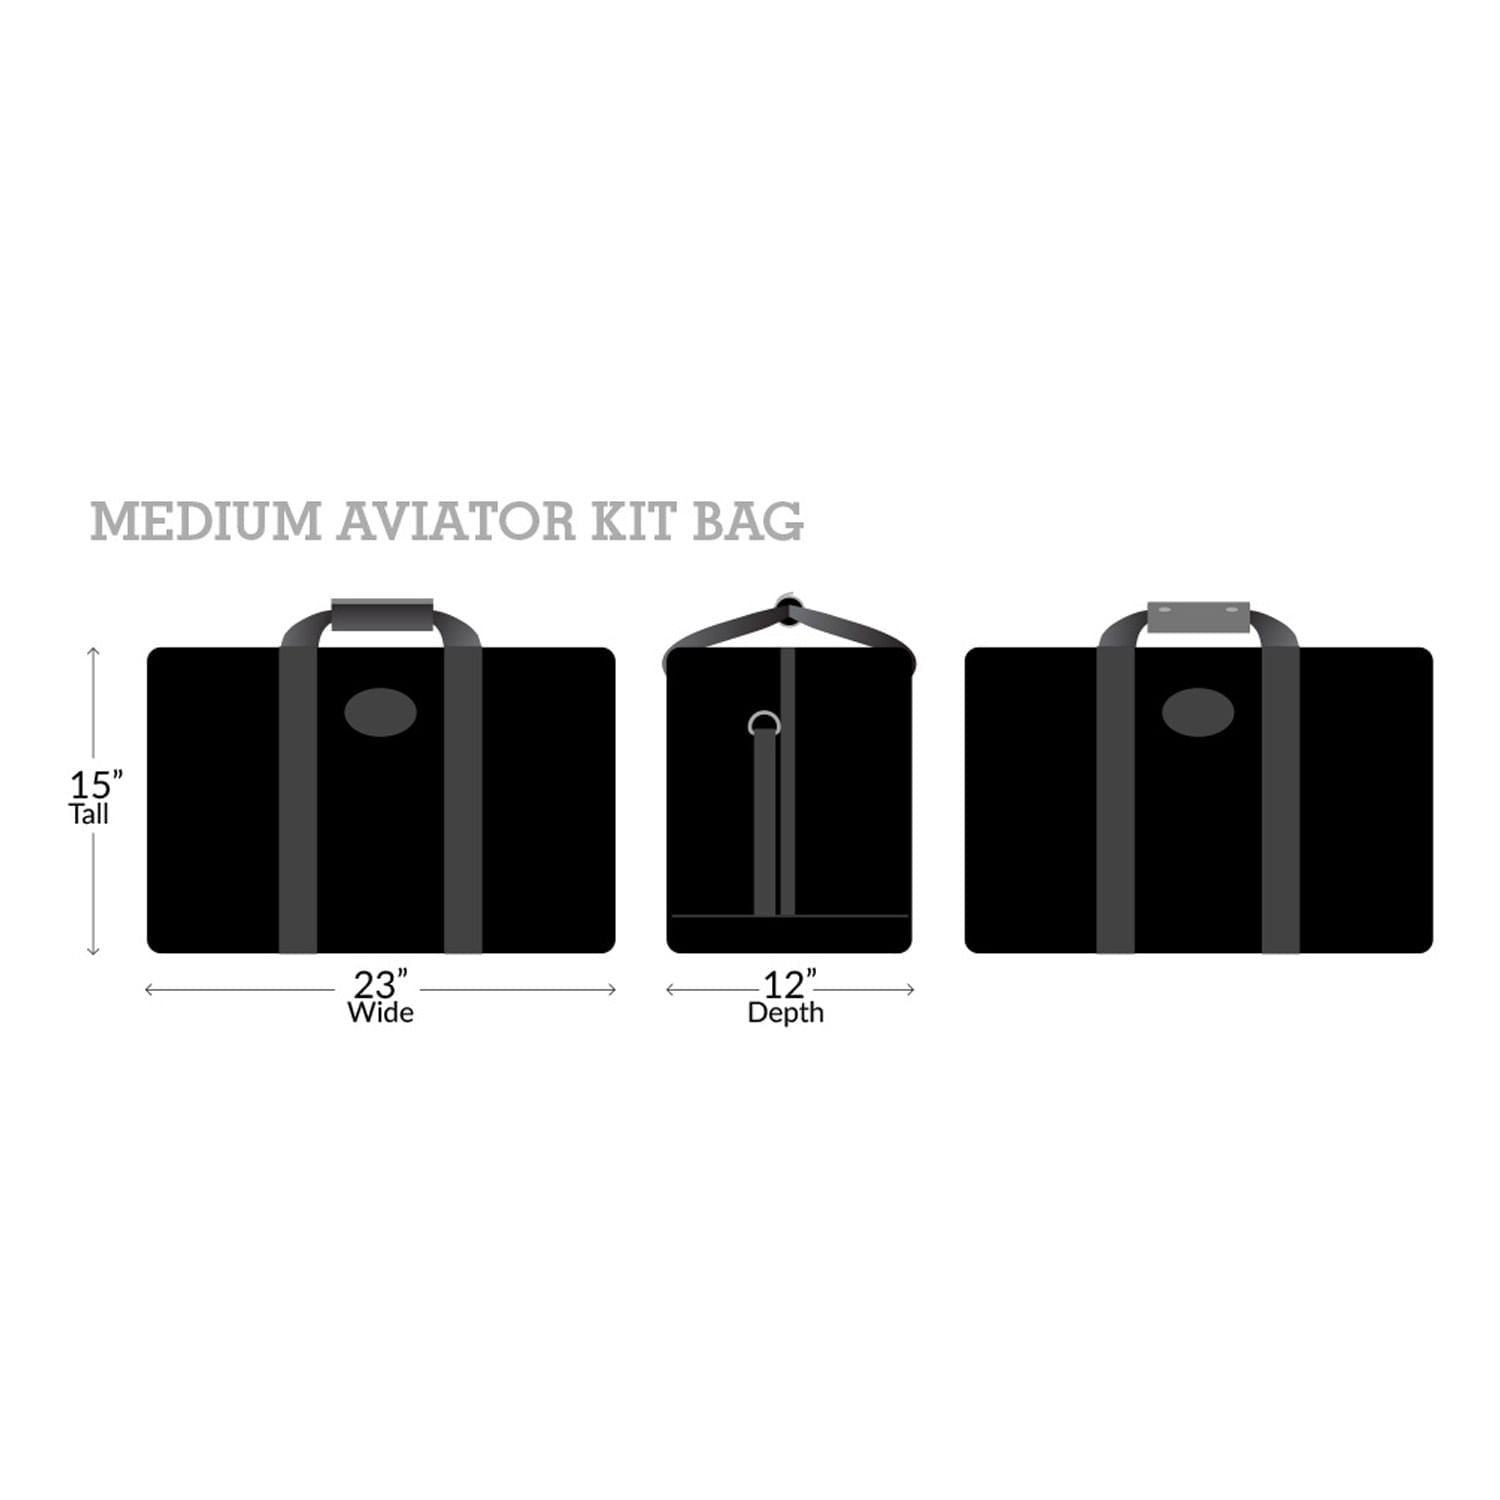 Medium aviator kit bag measurements.  15 inches tall x 23 inches wide x 12 inches depth. 